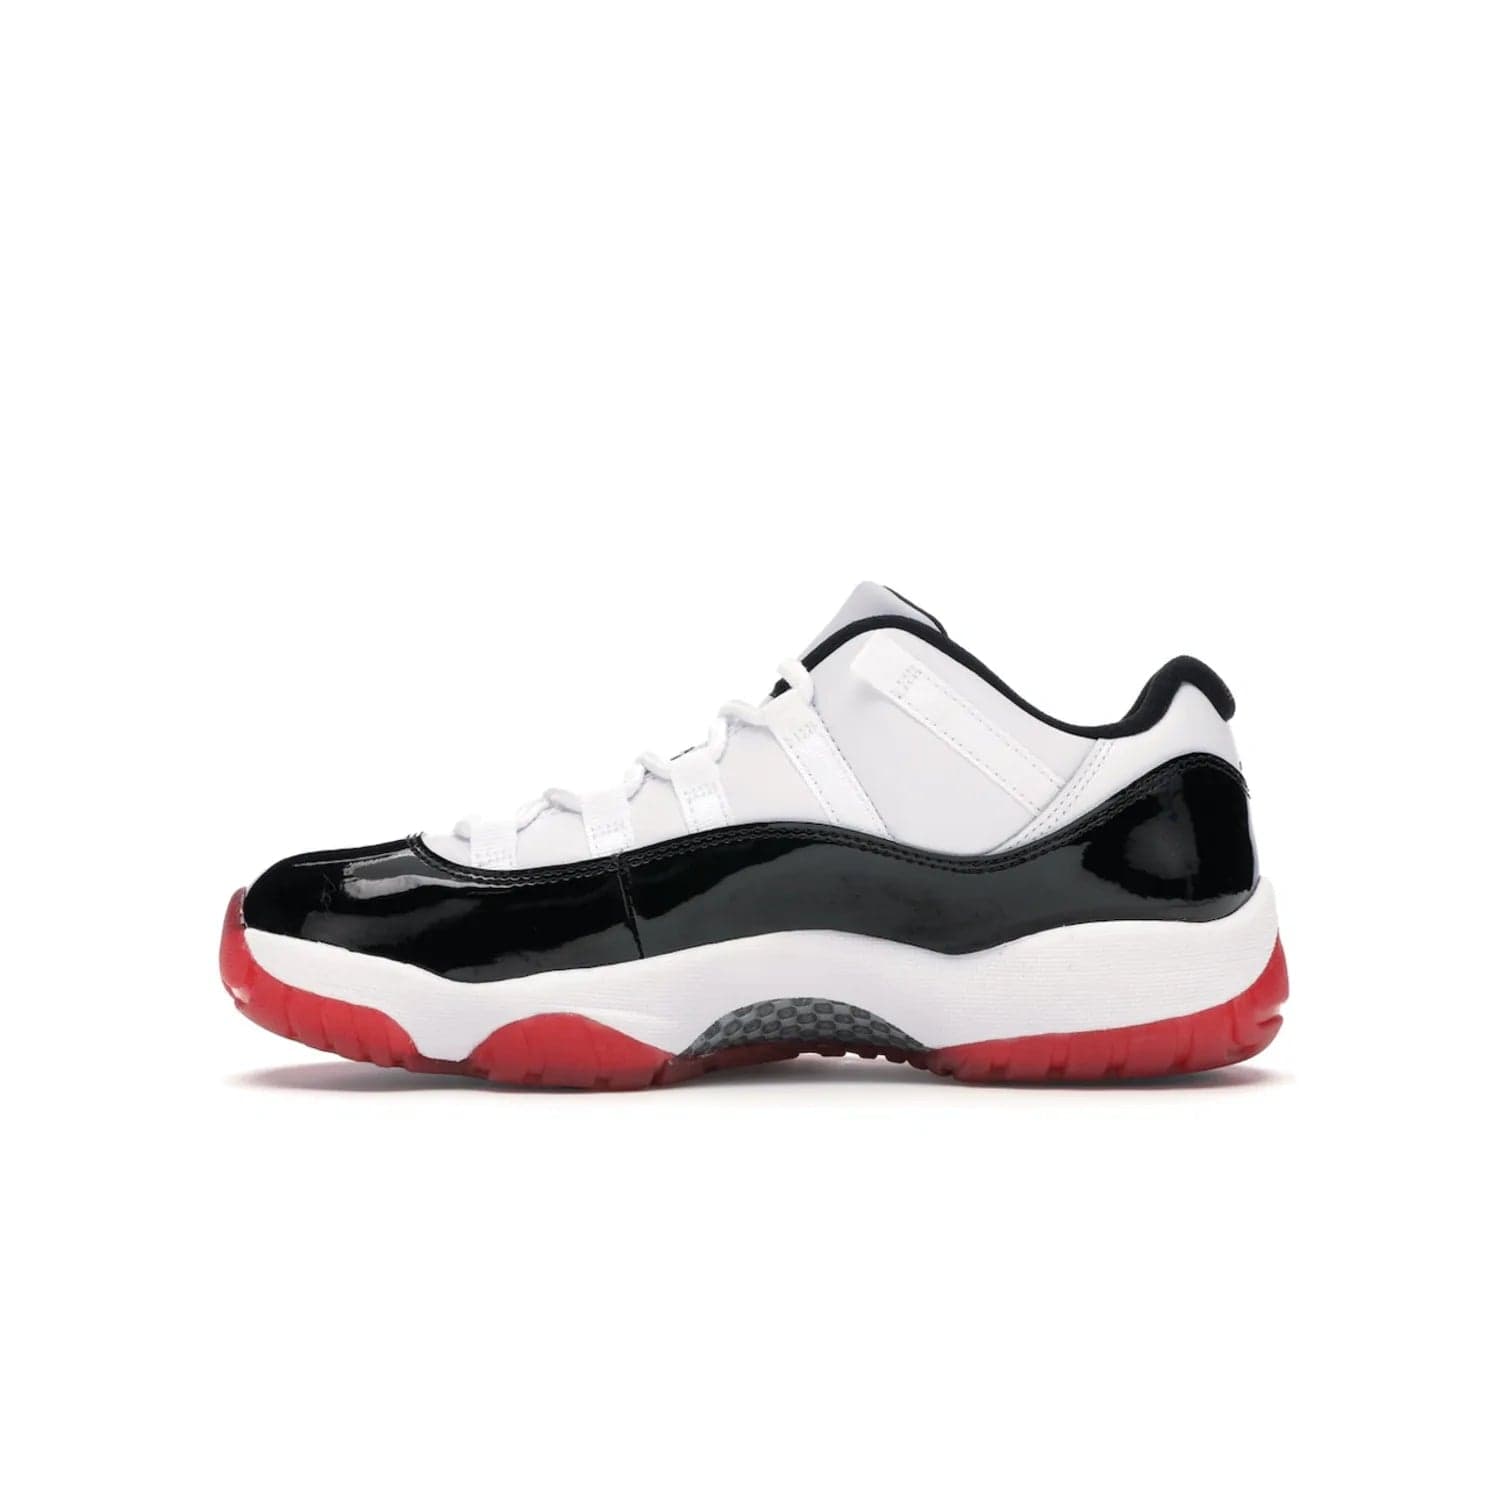 Jordan 11 Retro Low Concord Bred - Image 19 - Only at www.BallersClubKickz.com - Grab the classic Jordan 11 look with the Jordan 11 Retro Low Concord Bred. With white and black elements and the iconic red outsole of the Jordan 11 Bred, you won't miss a beat. Released in June 2020, the perfect complement to any outfit.